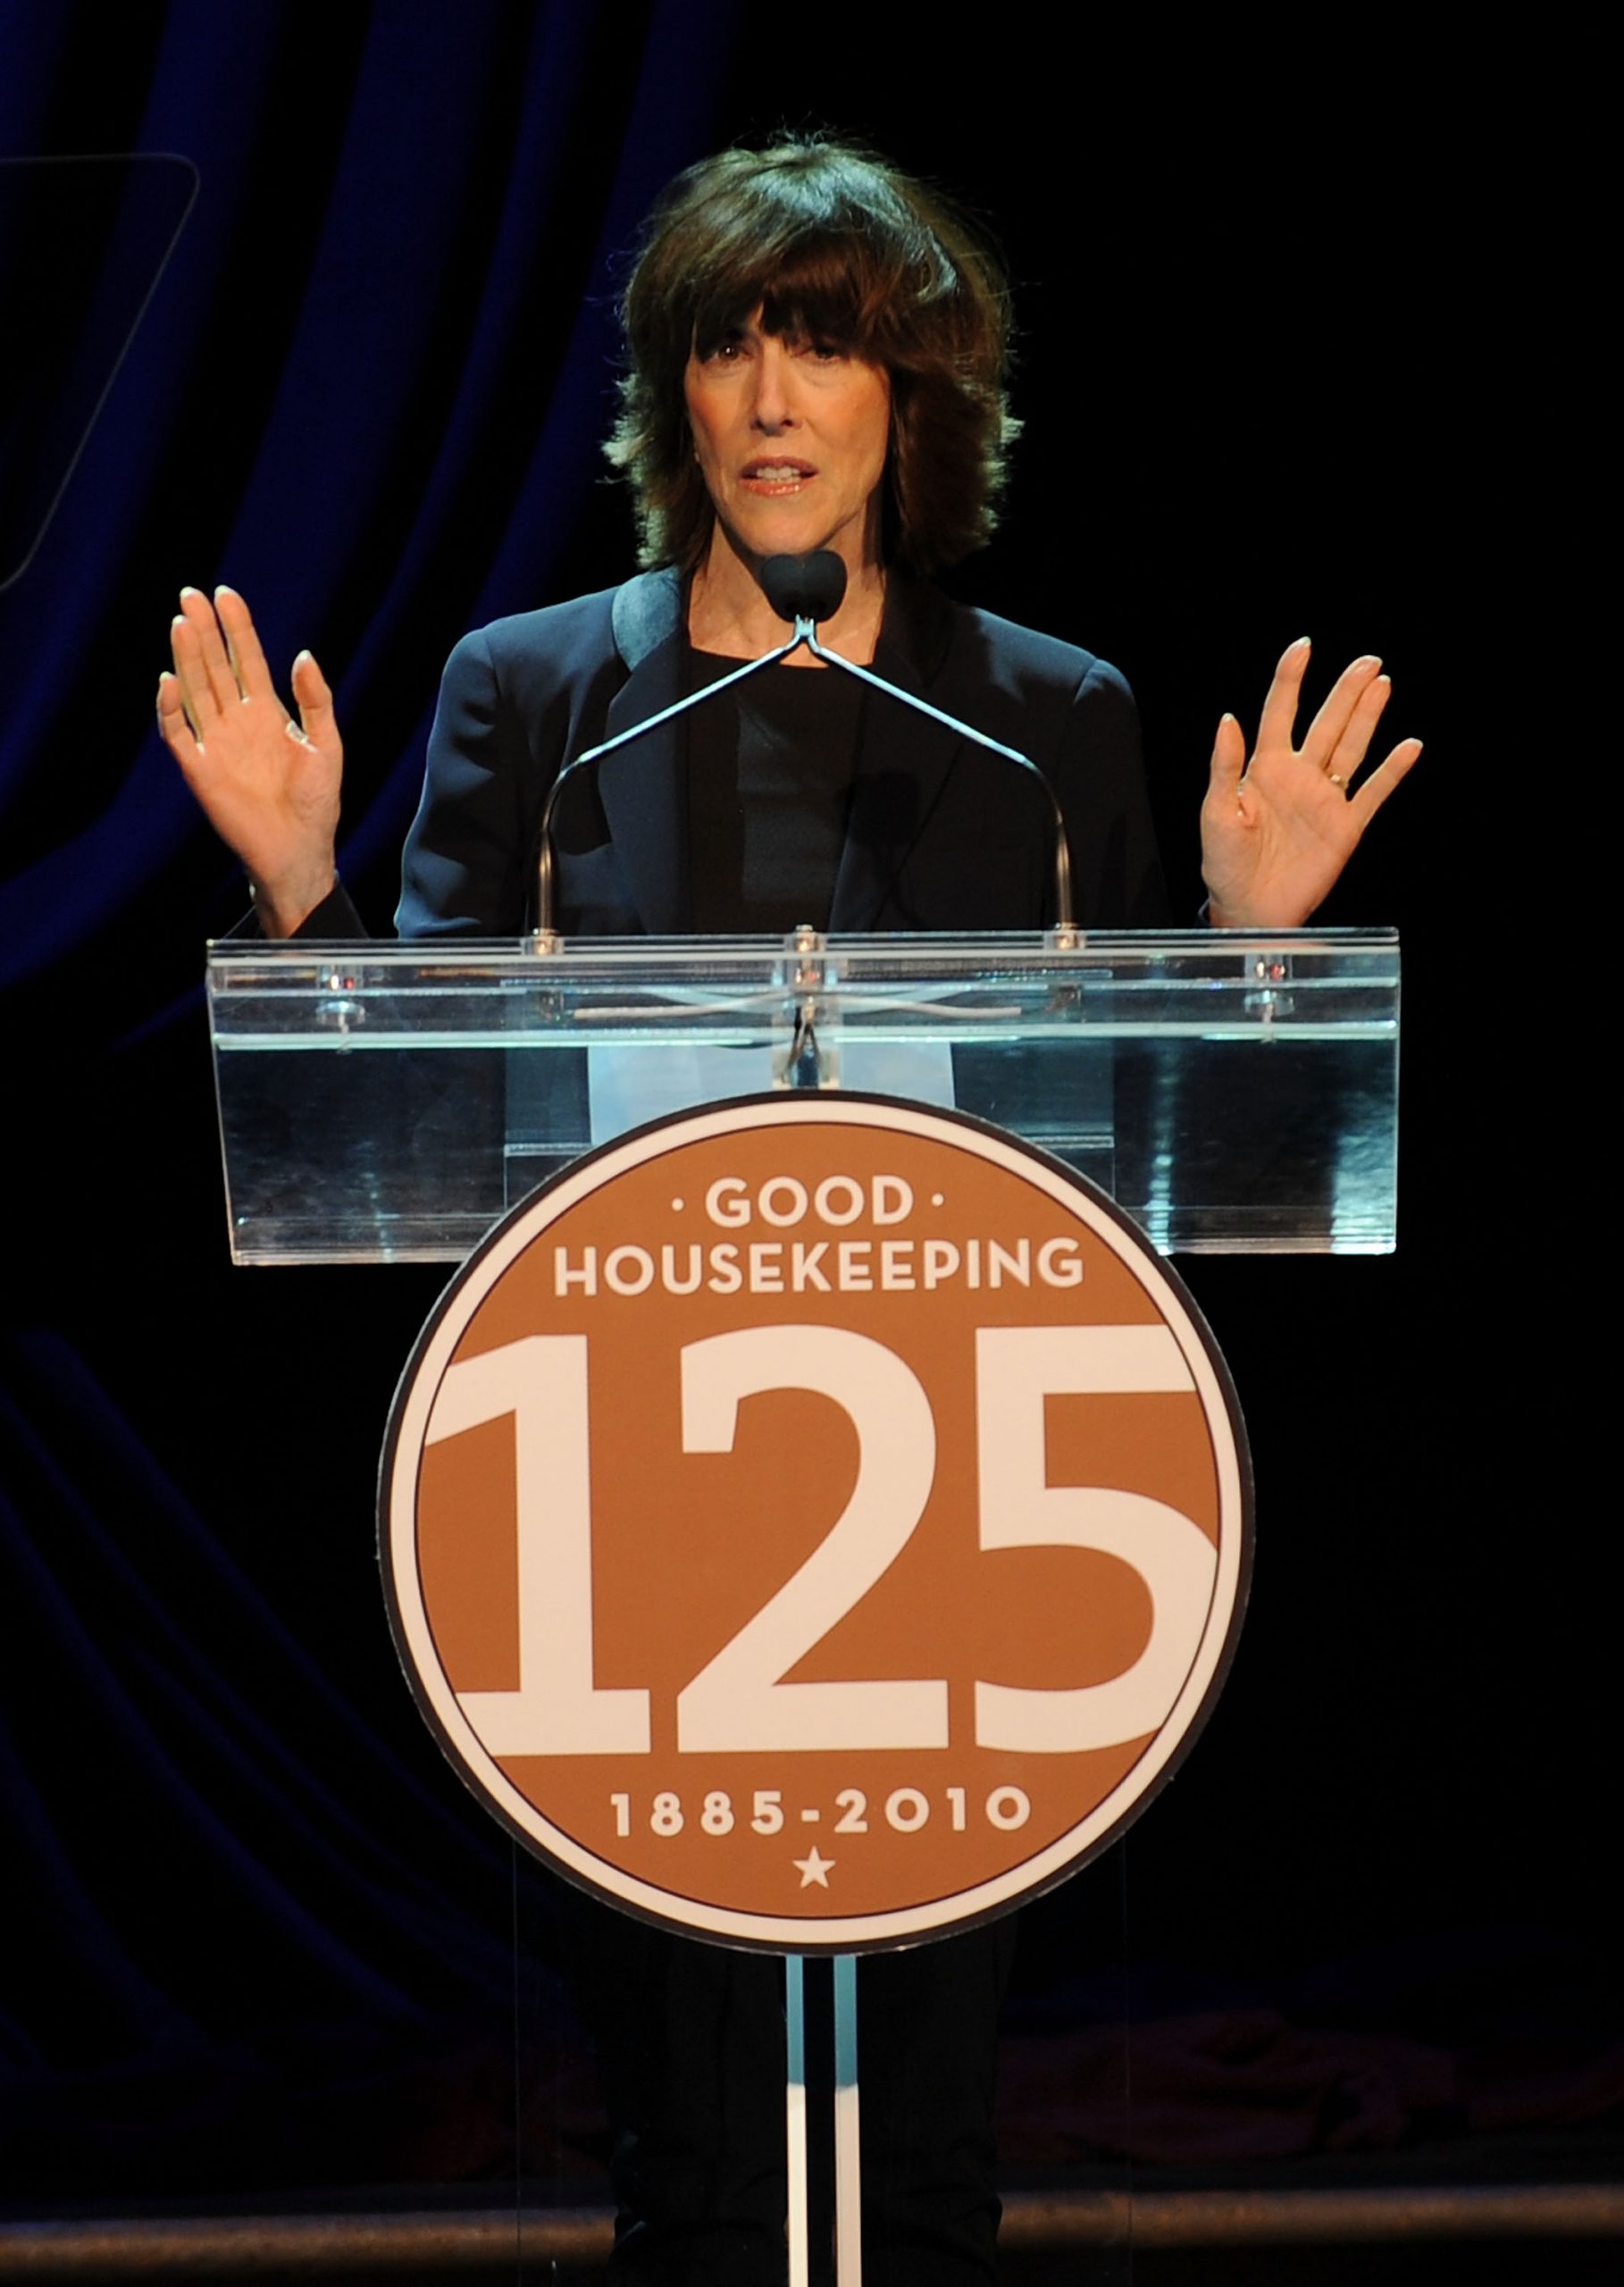 Good Housekeeping’s “Shine On” 125 Yrs of Women Making Their Mark – Show